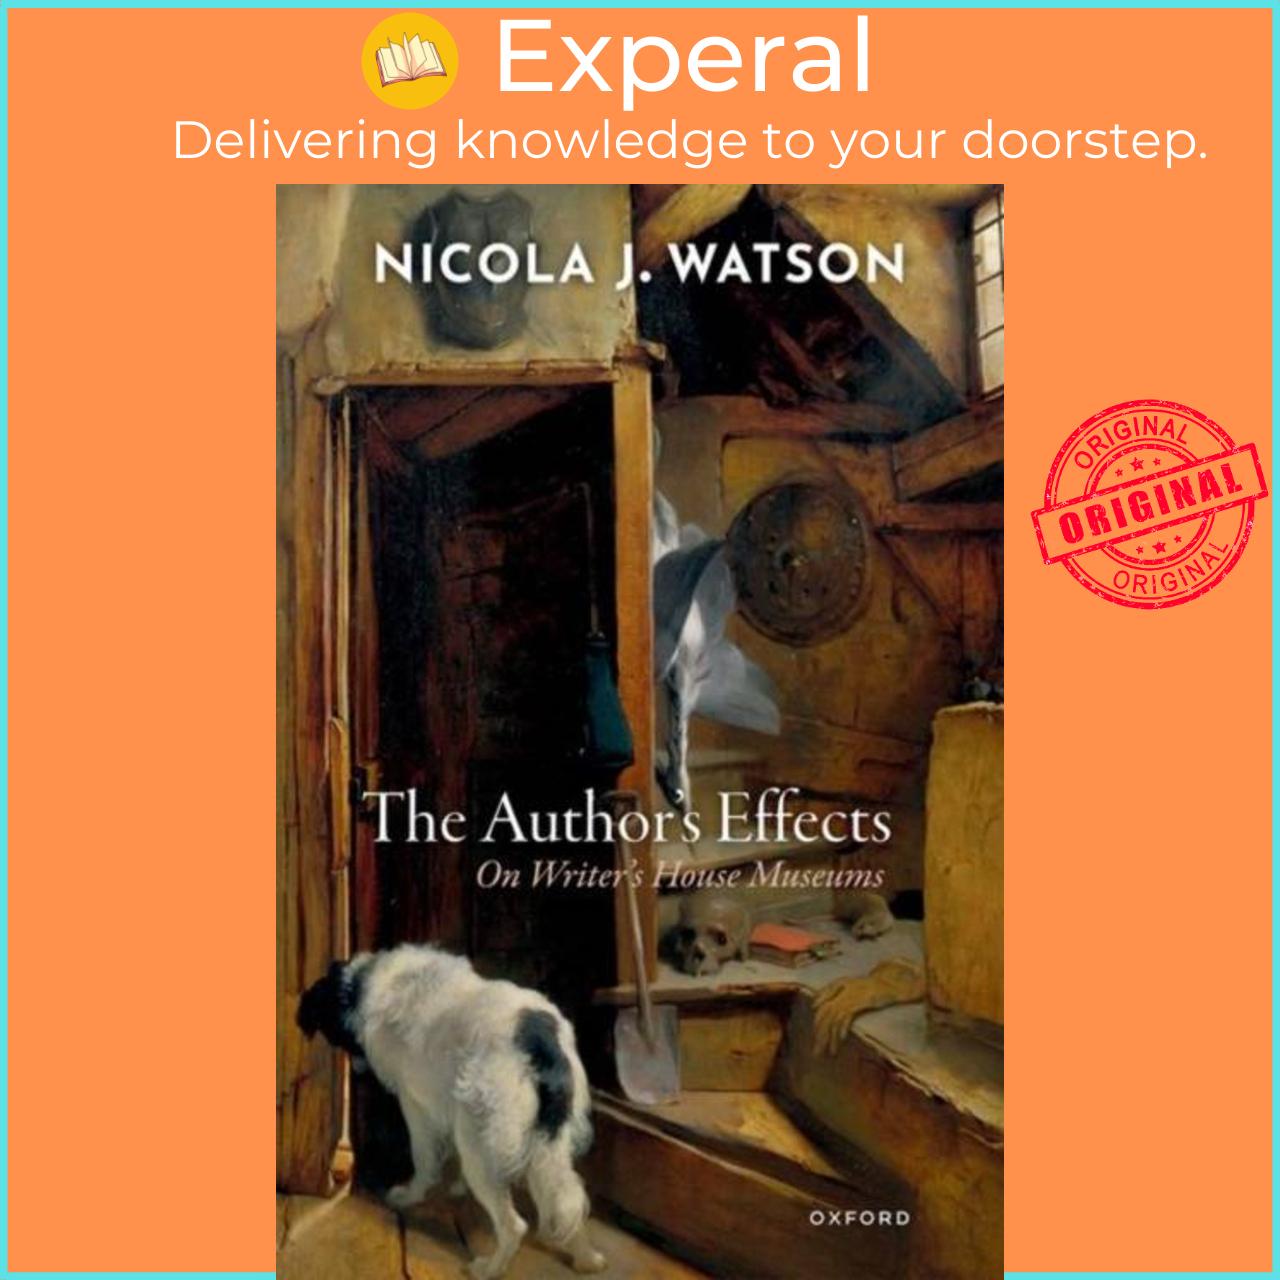 Sách - The Author's Effects - On Writer's House Museums by Nicola J. Watson (UK edition, paperback)